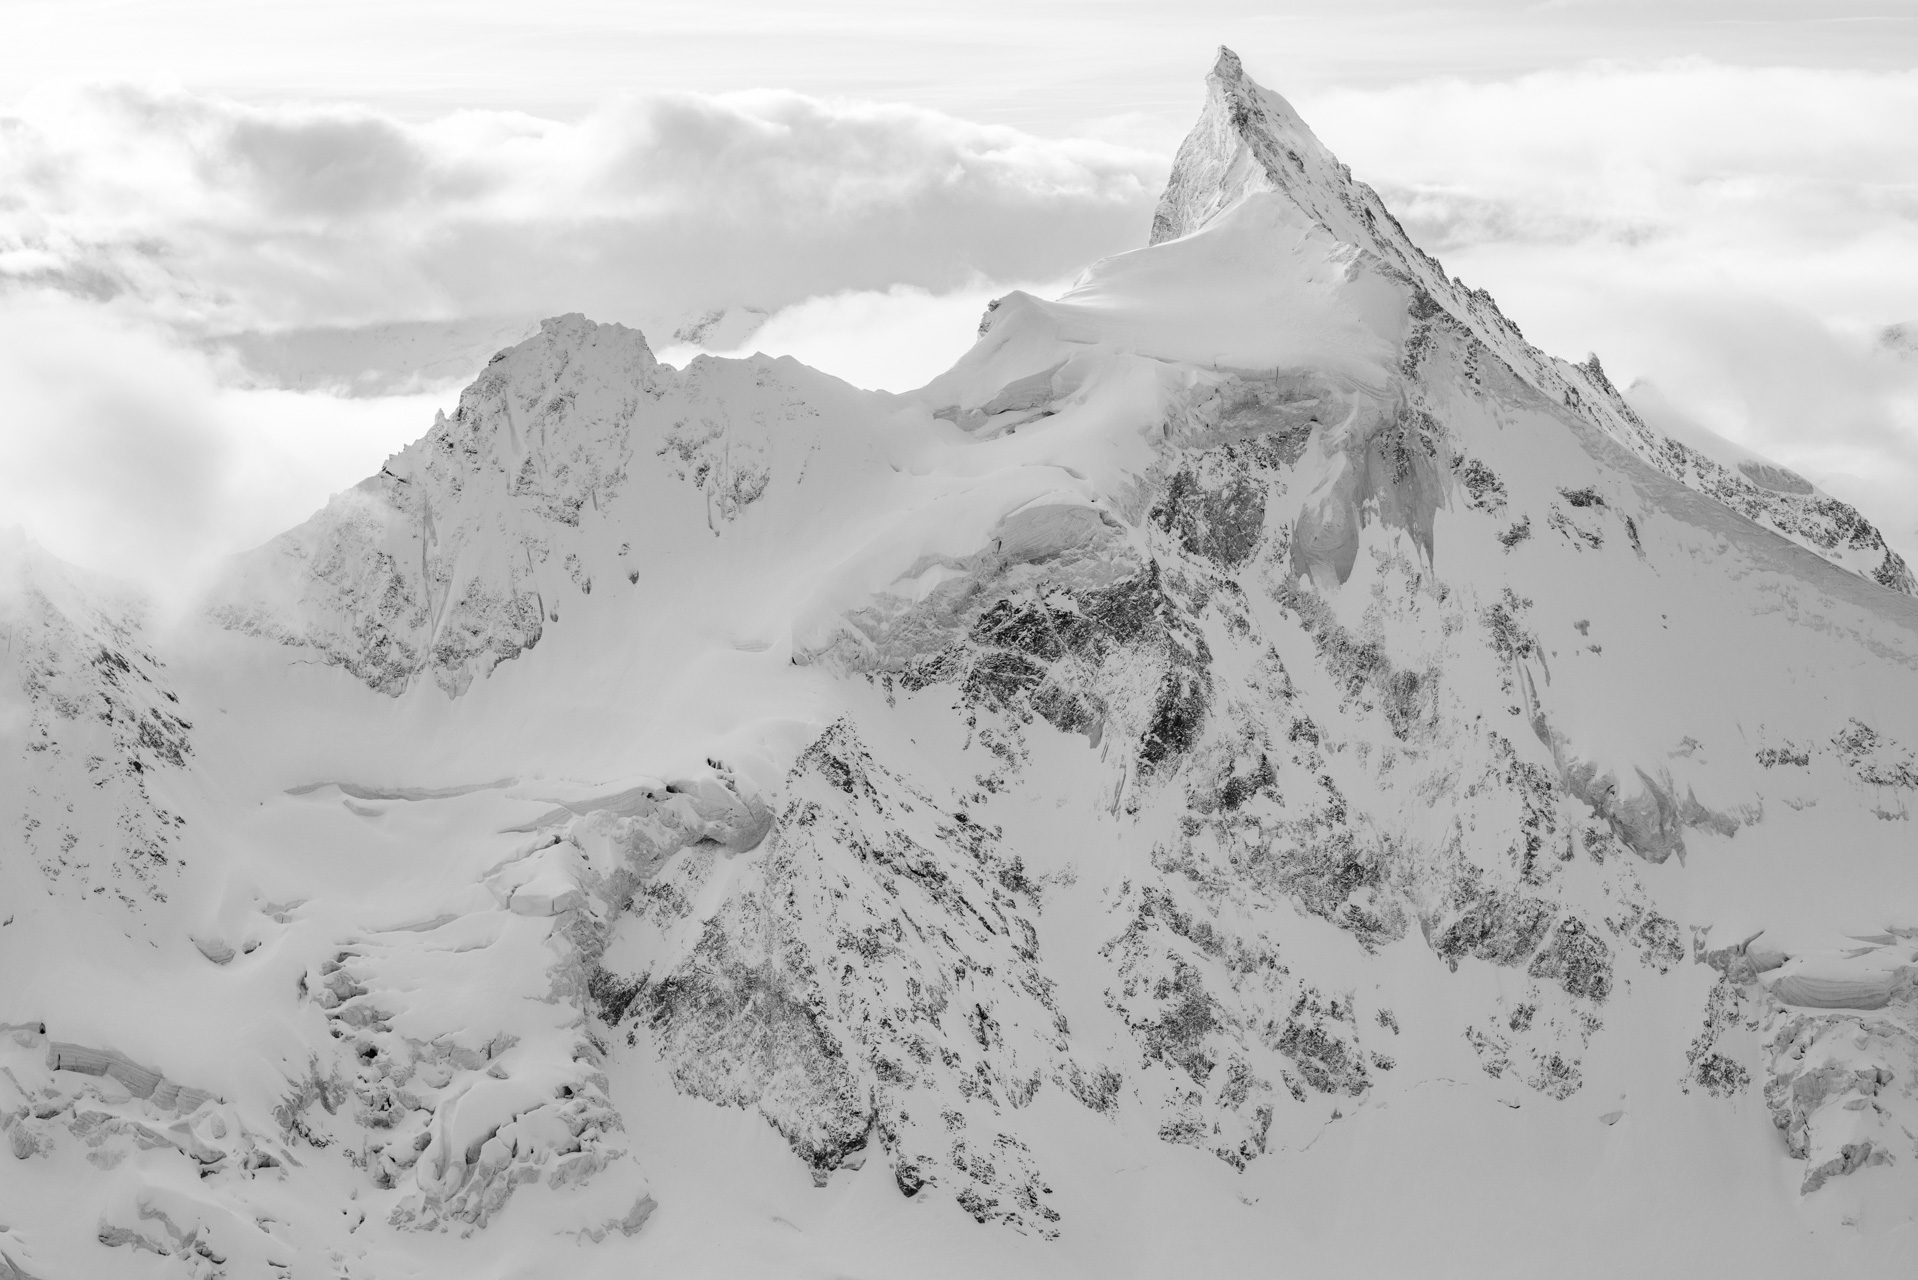 Zinalrothorn - Swiss alpine mountains - Black and white landscape and mountains photo in Switzerland